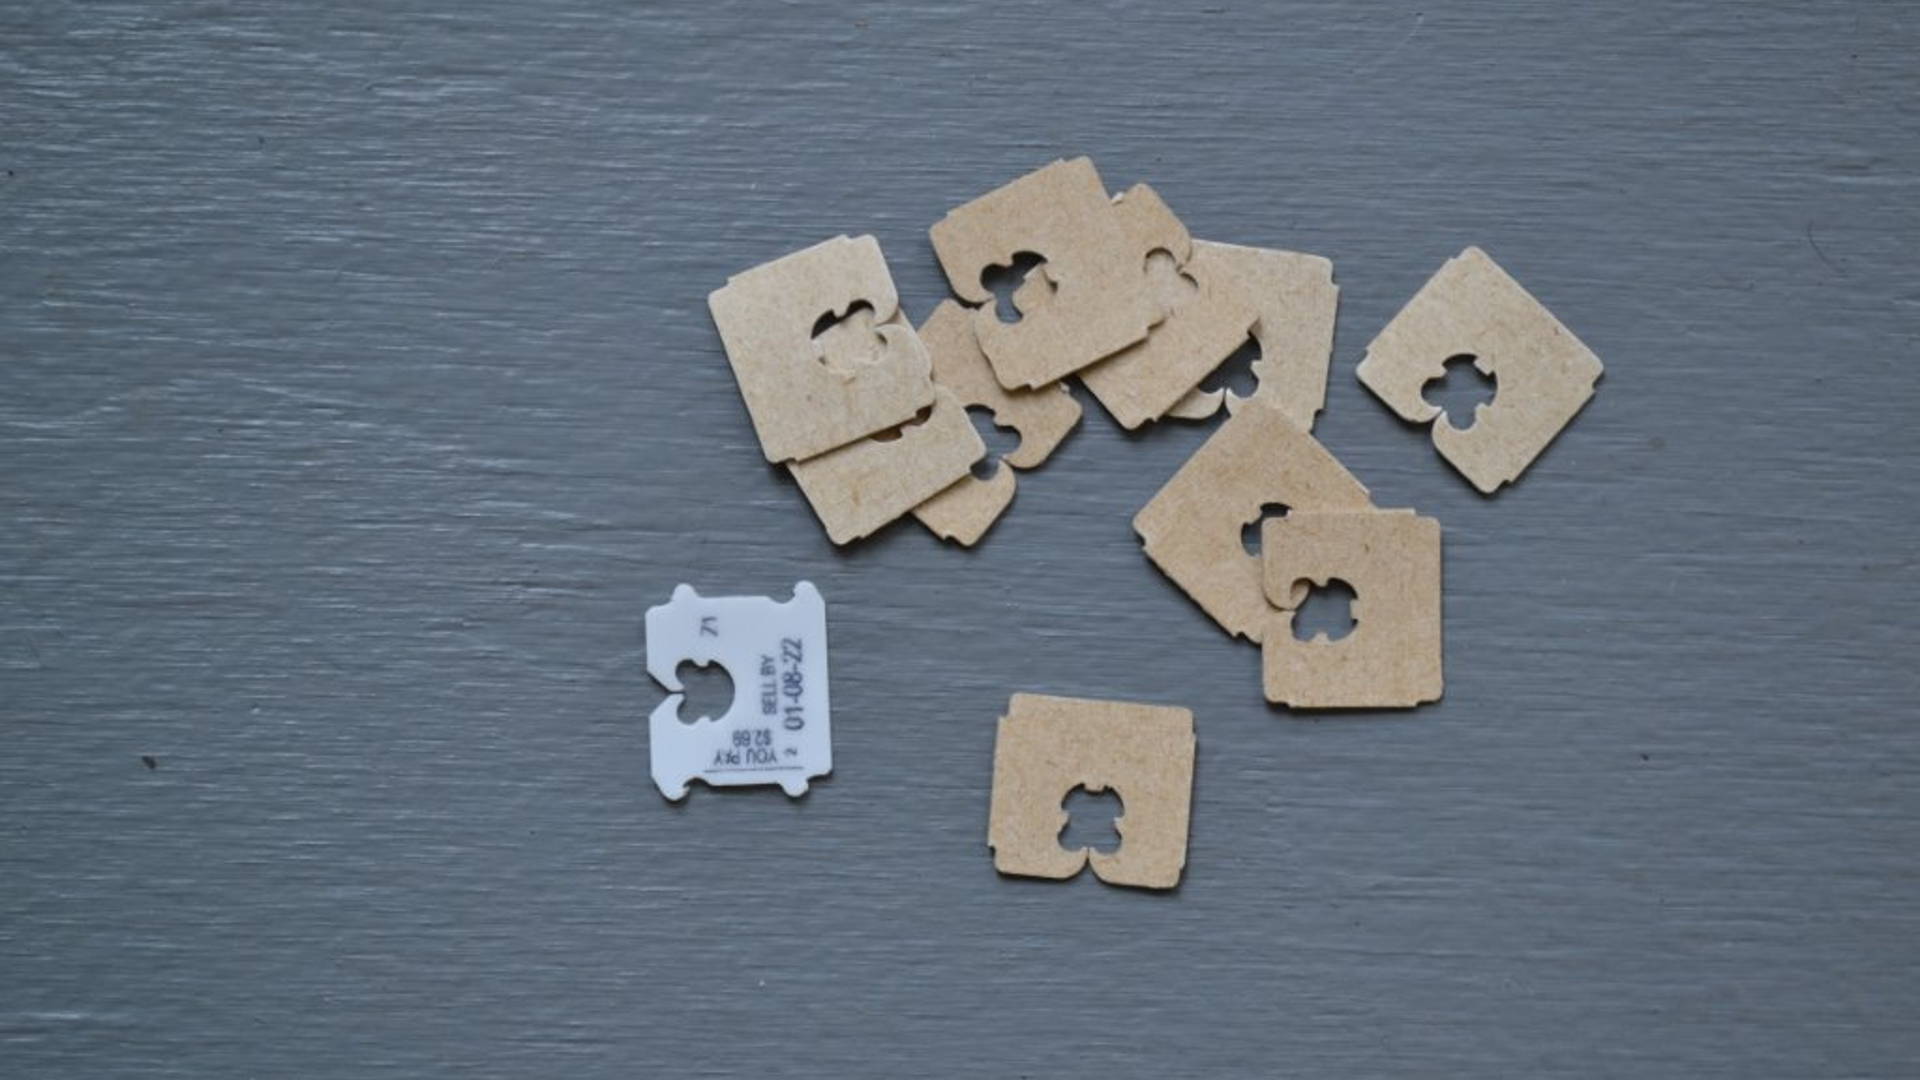 Chip Clips That Are Good For The Wildlife  Dieline - Design, Branding &  Packaging Inspiration